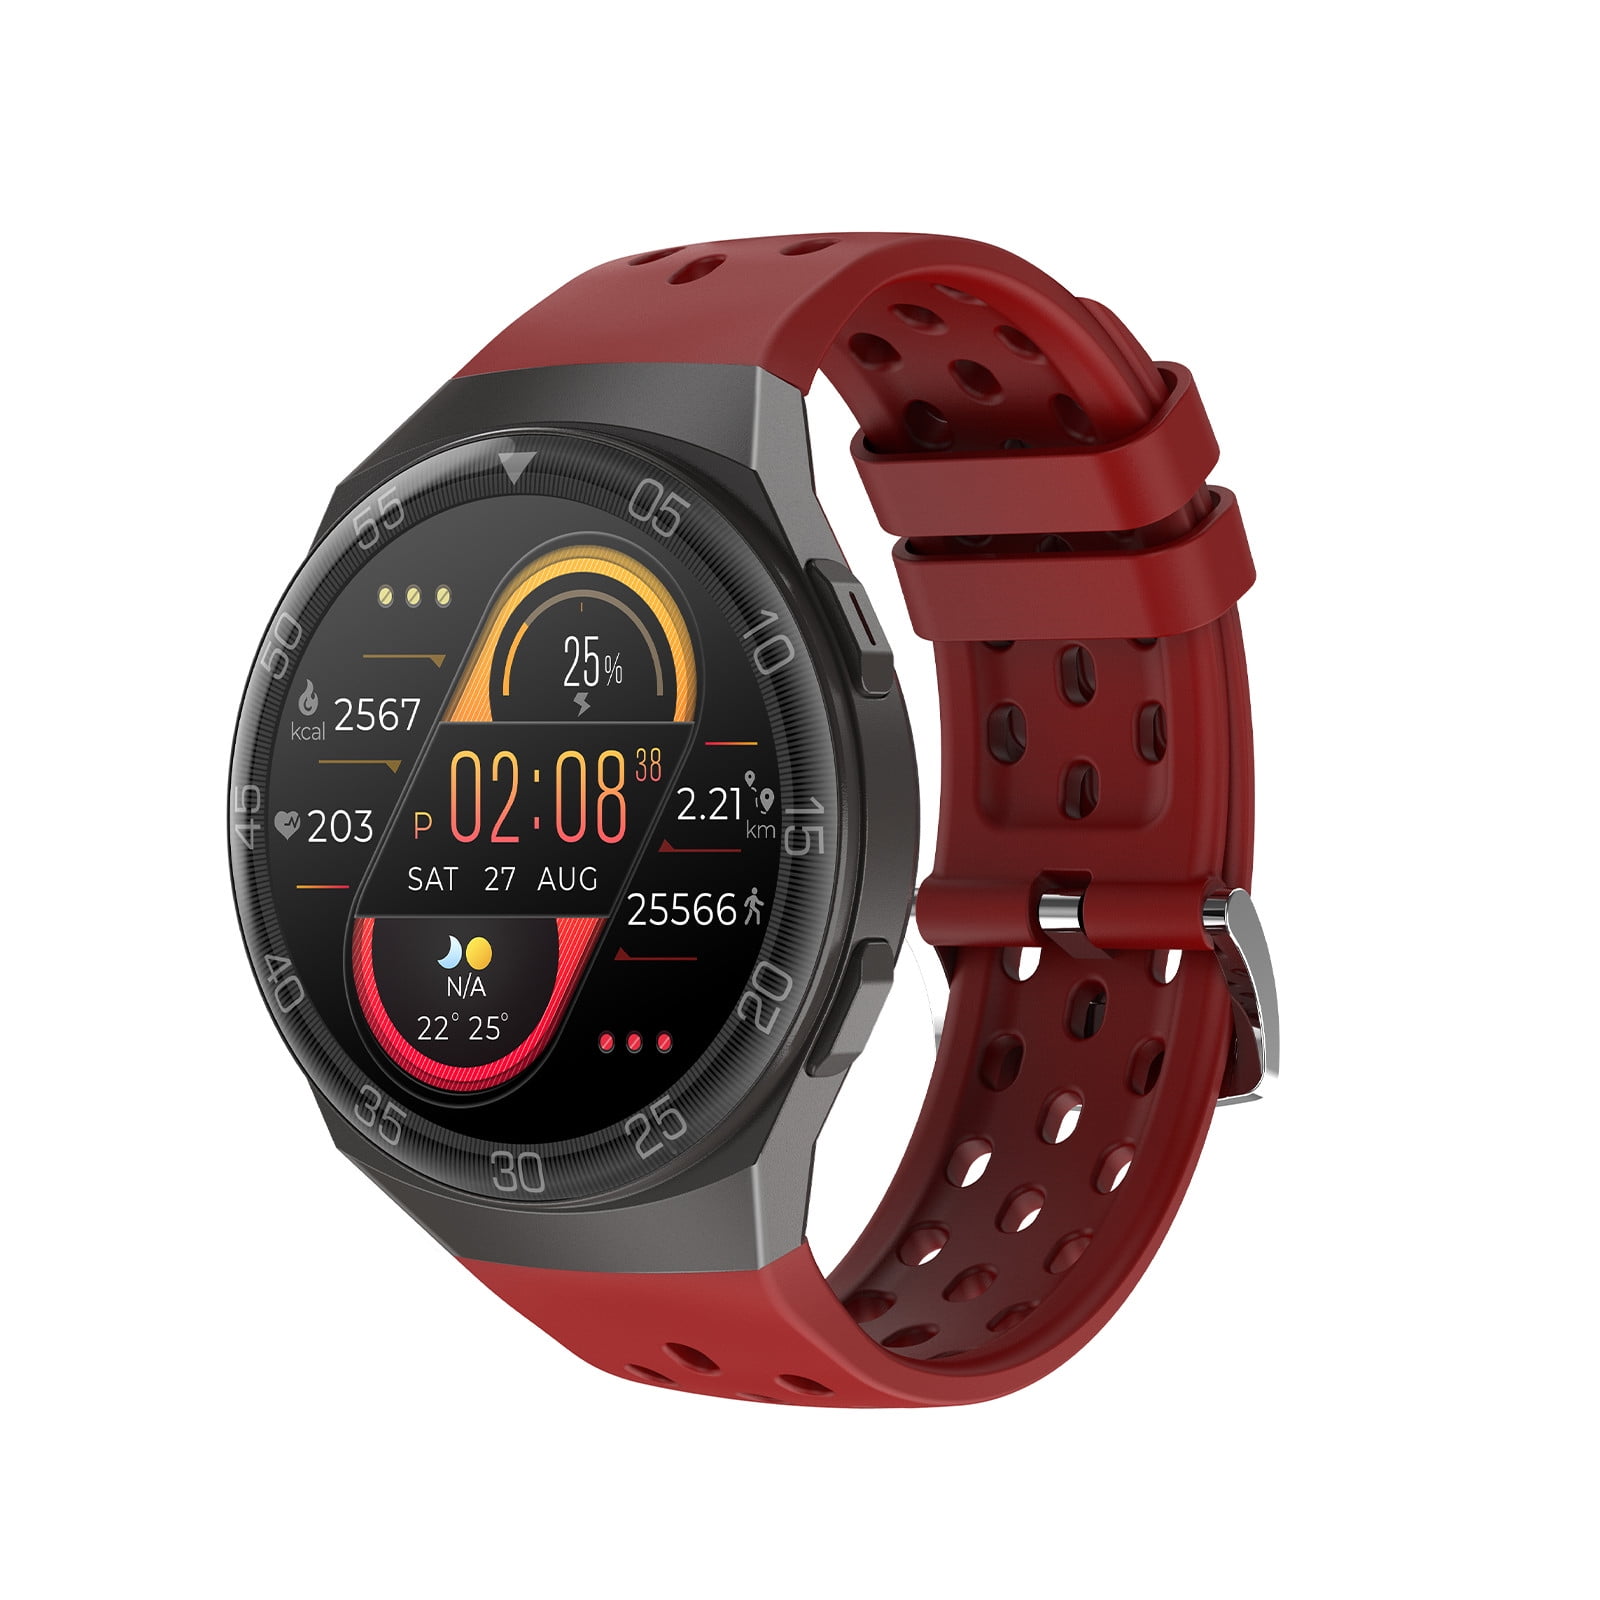 mundstykke nål svinge Smart Watch,Fitness Watch With Sleep Monitor With 1.28 Inch HD Touching  Screen, IP68 Waterproof Smartwatch With Step Monitor - Walmart.com